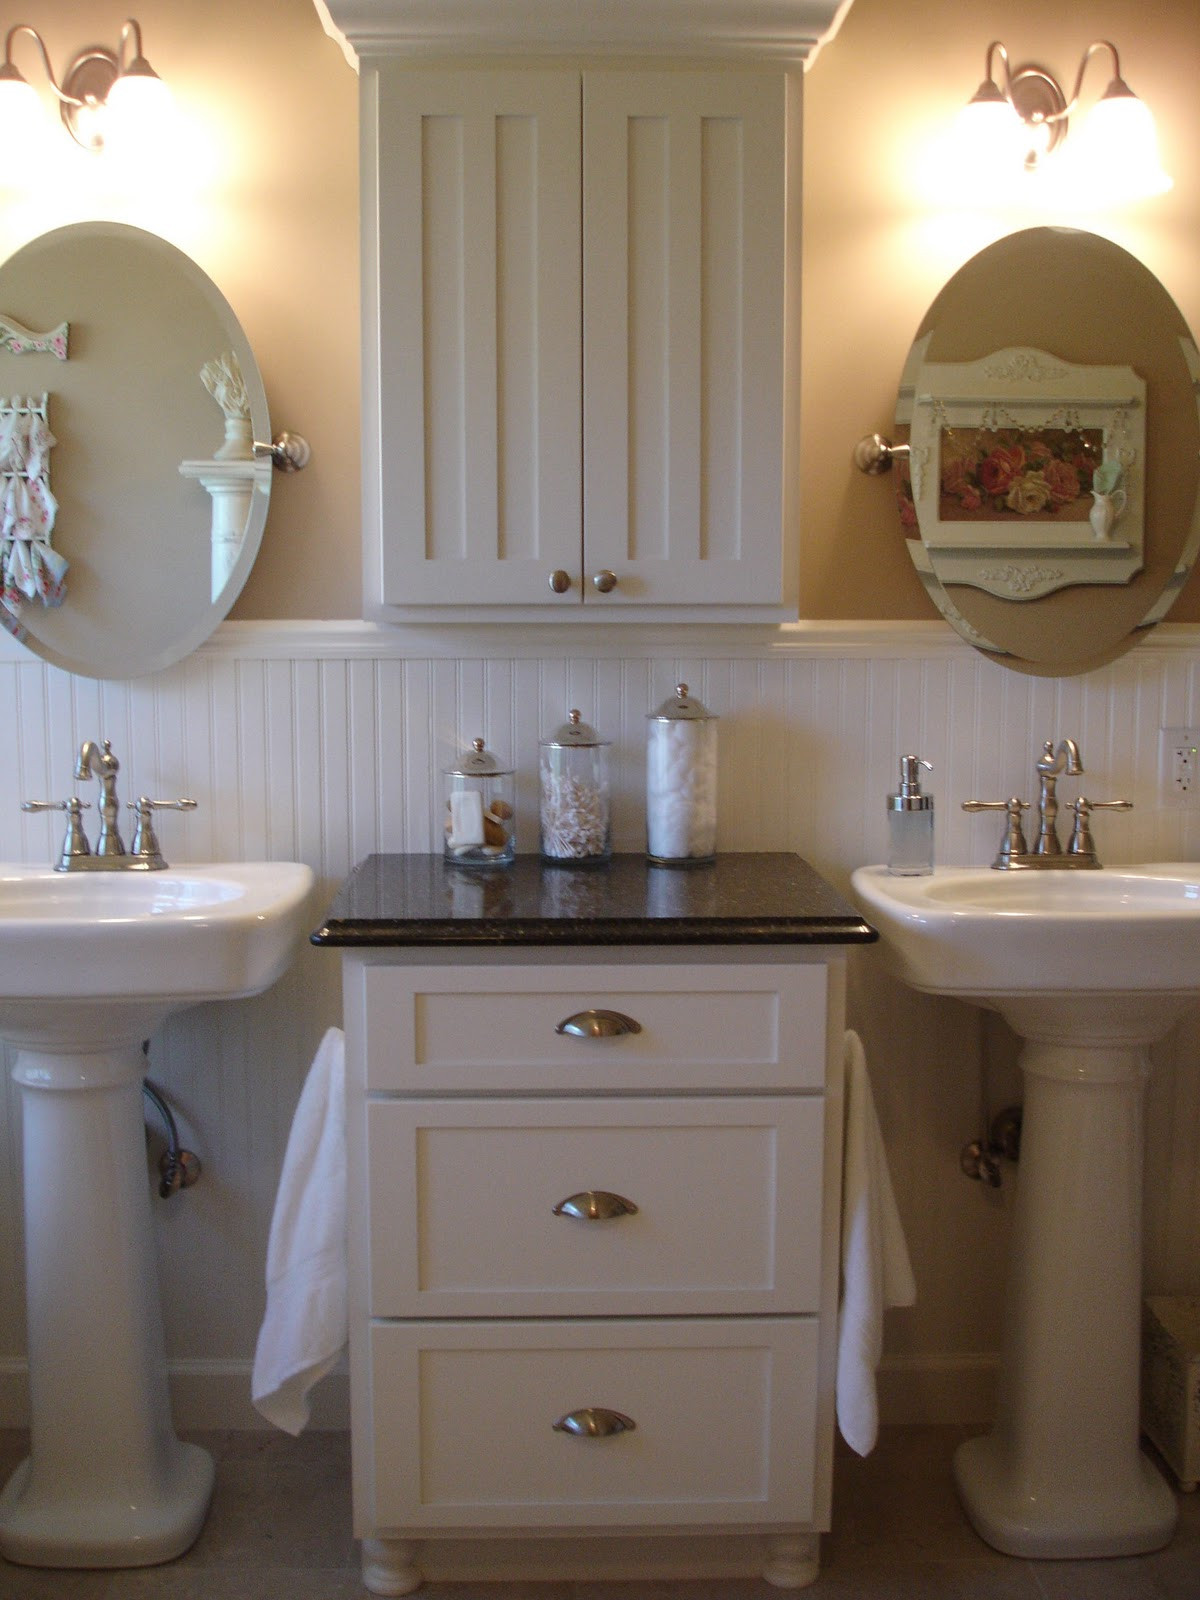 Small Bathroom Cabinet Ideas
 Forever Decorating My Master BathRoom Update